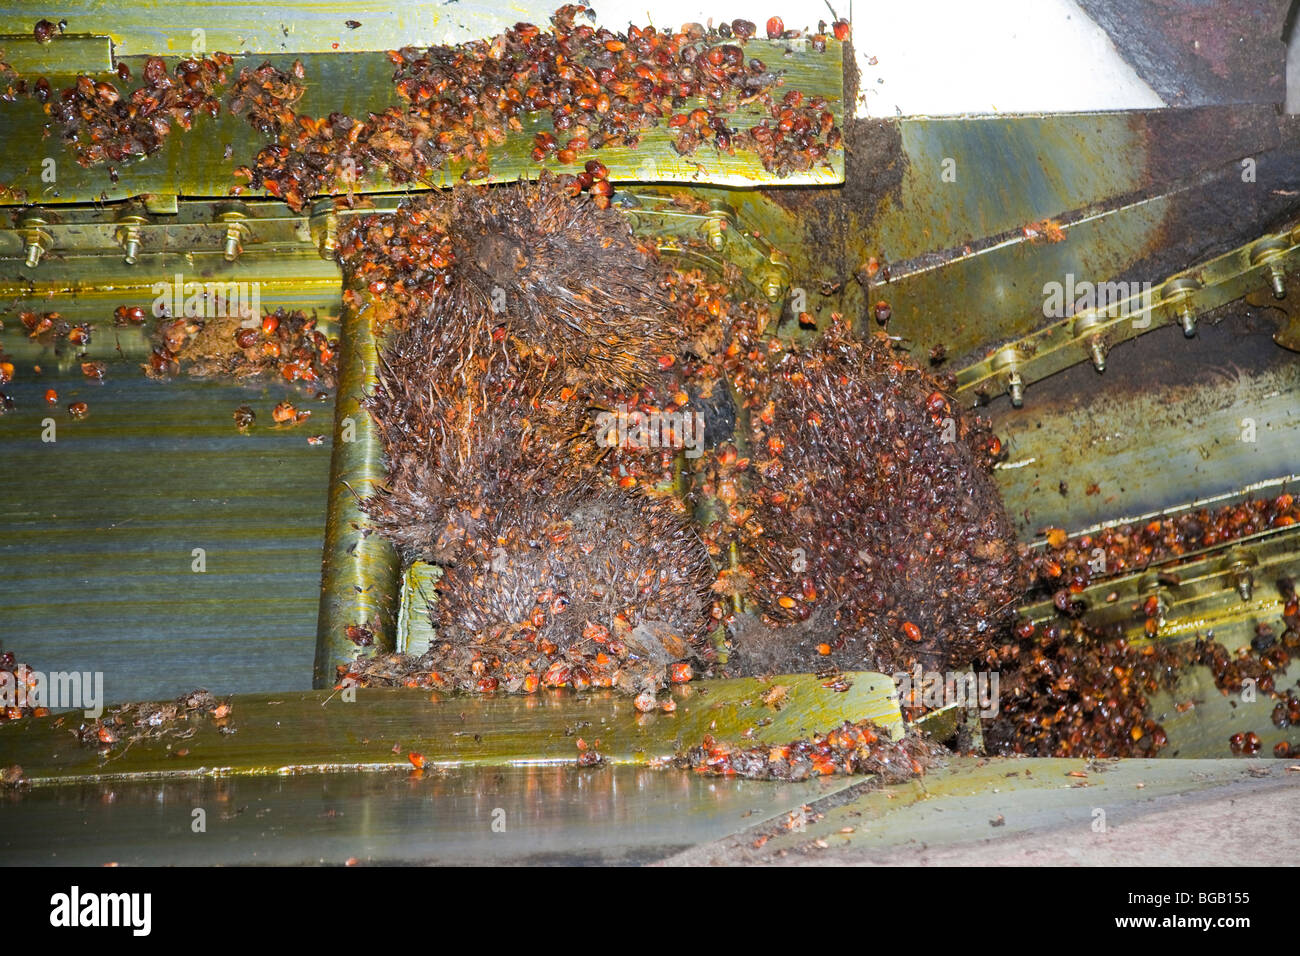 The steaming hot oil palm fresh fruit bunches (FFBs) are emptied out of the cooker. The Sindora Palm Oil Mil, Malaysia Stock Photo